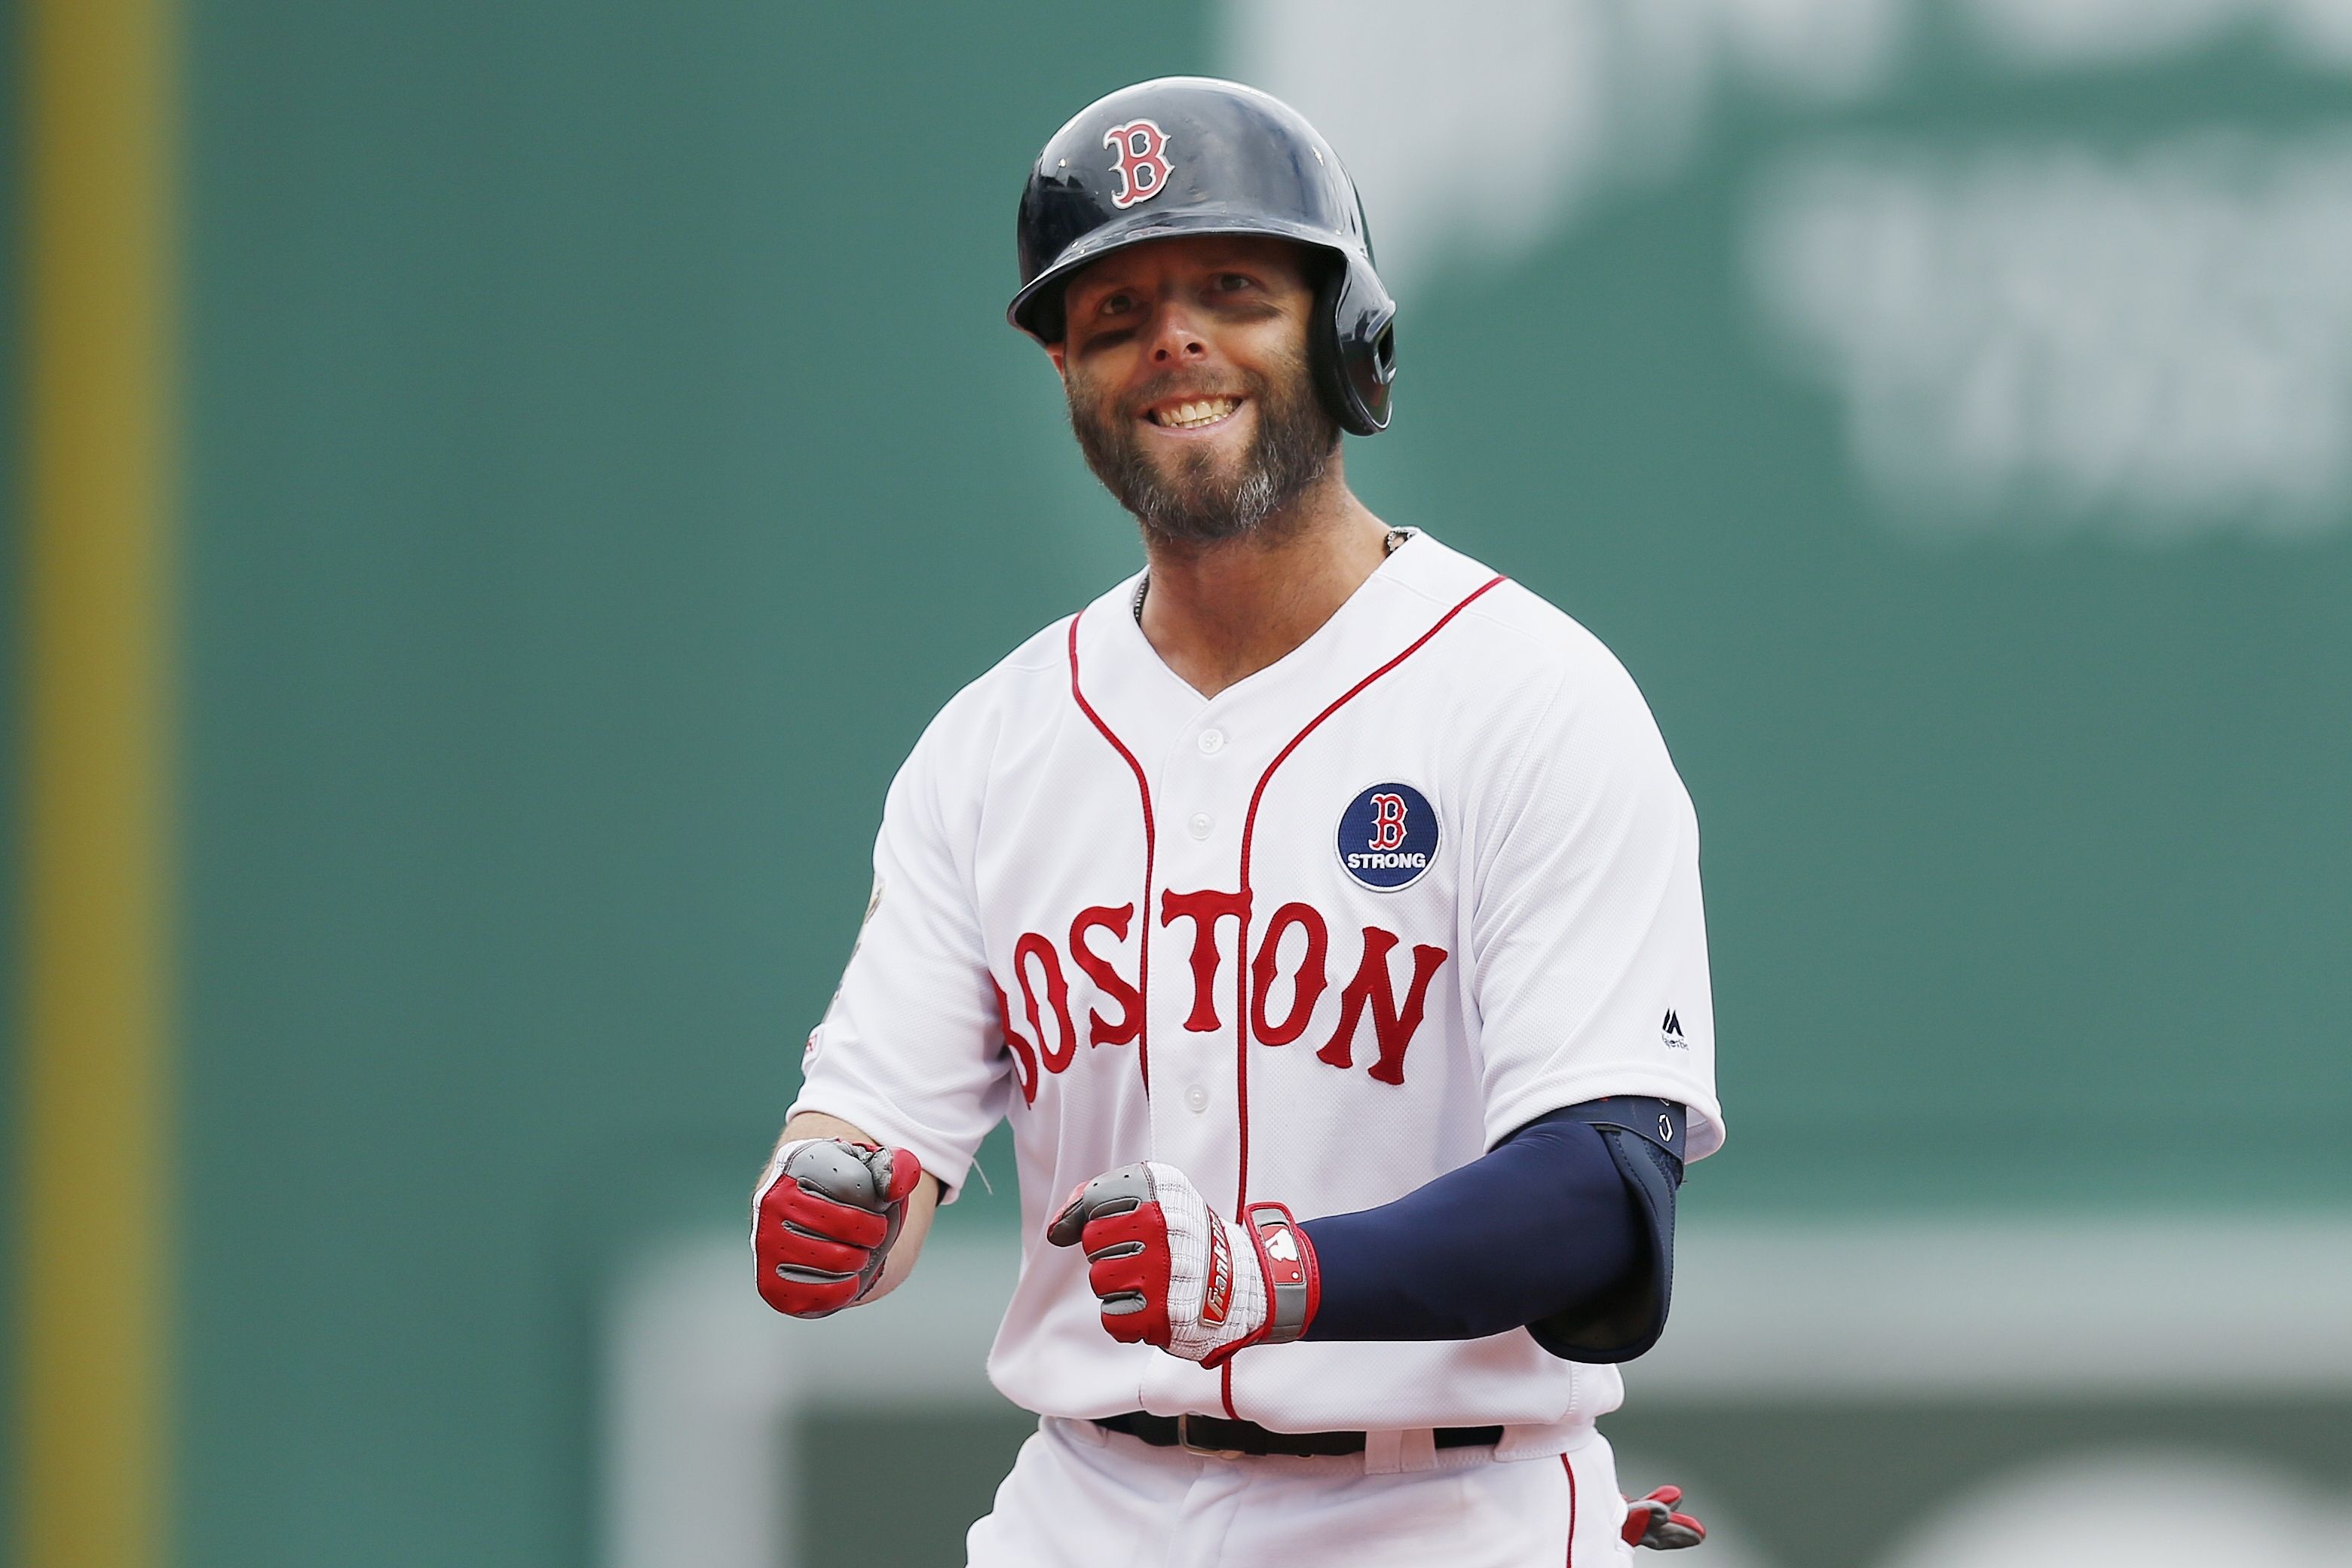 Dustin Pedroia retires from Red Sox. These are the moments that